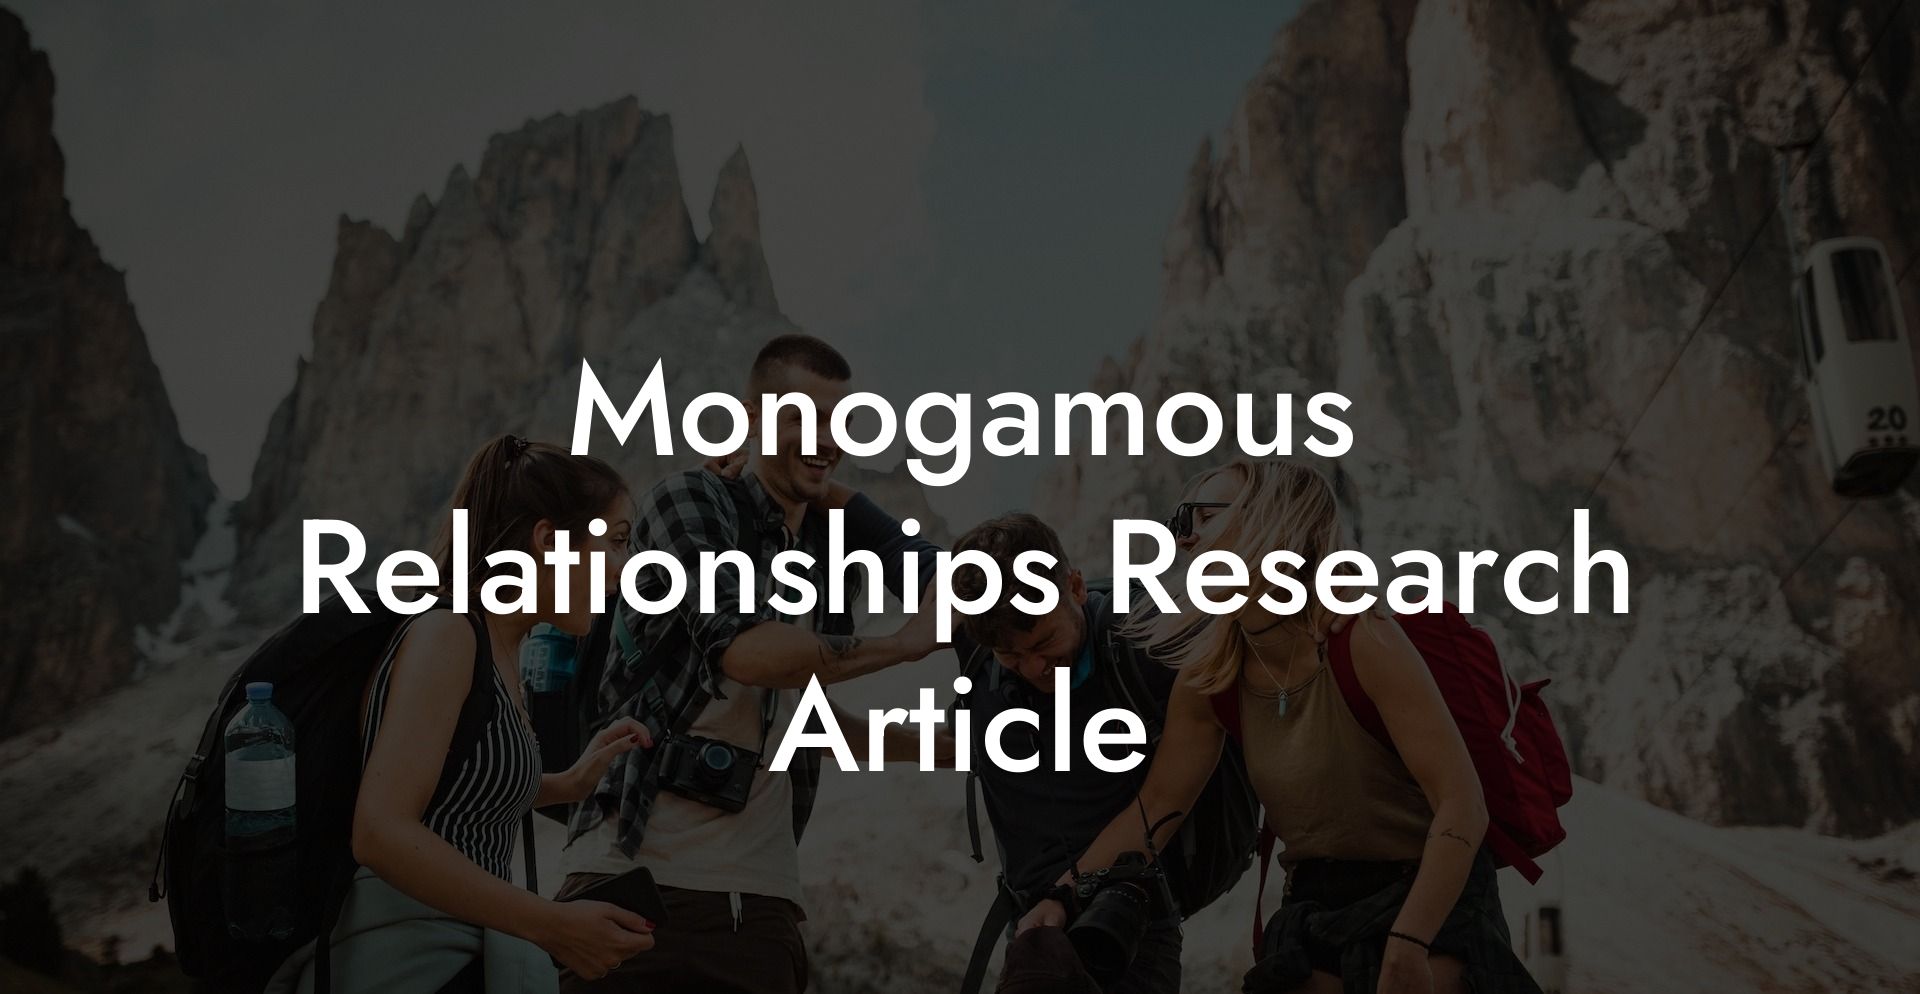 Monogamous Relationships Research Article